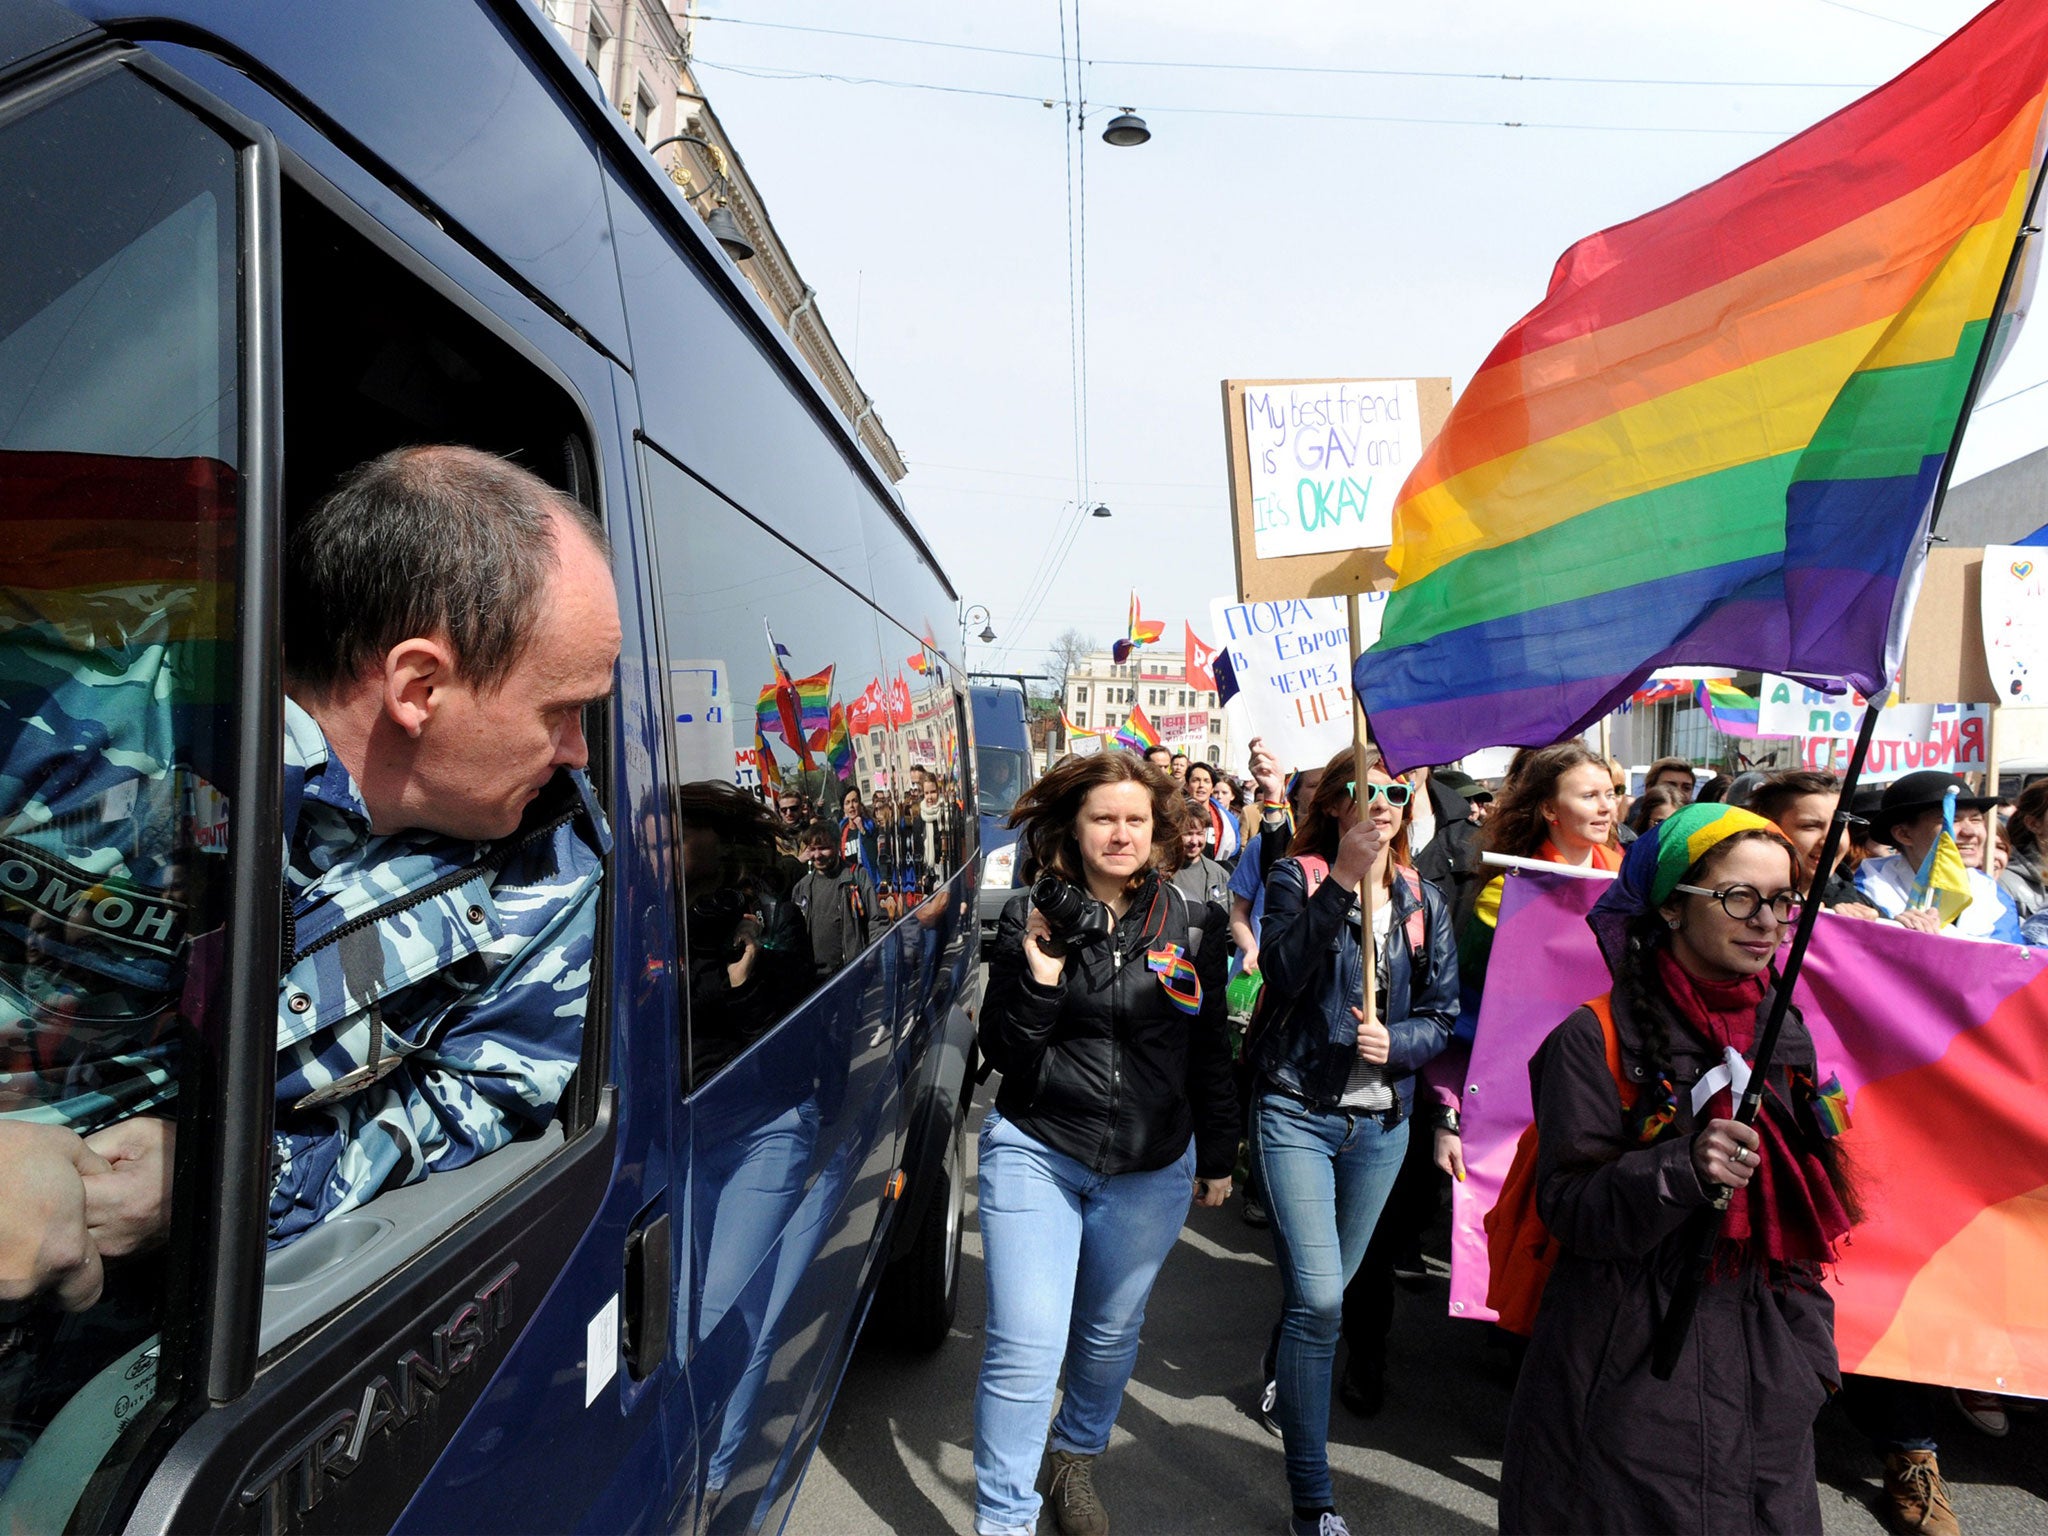 European Court Rules Russia S Gay Propaganda Law Encourages Homophobia The Independent The